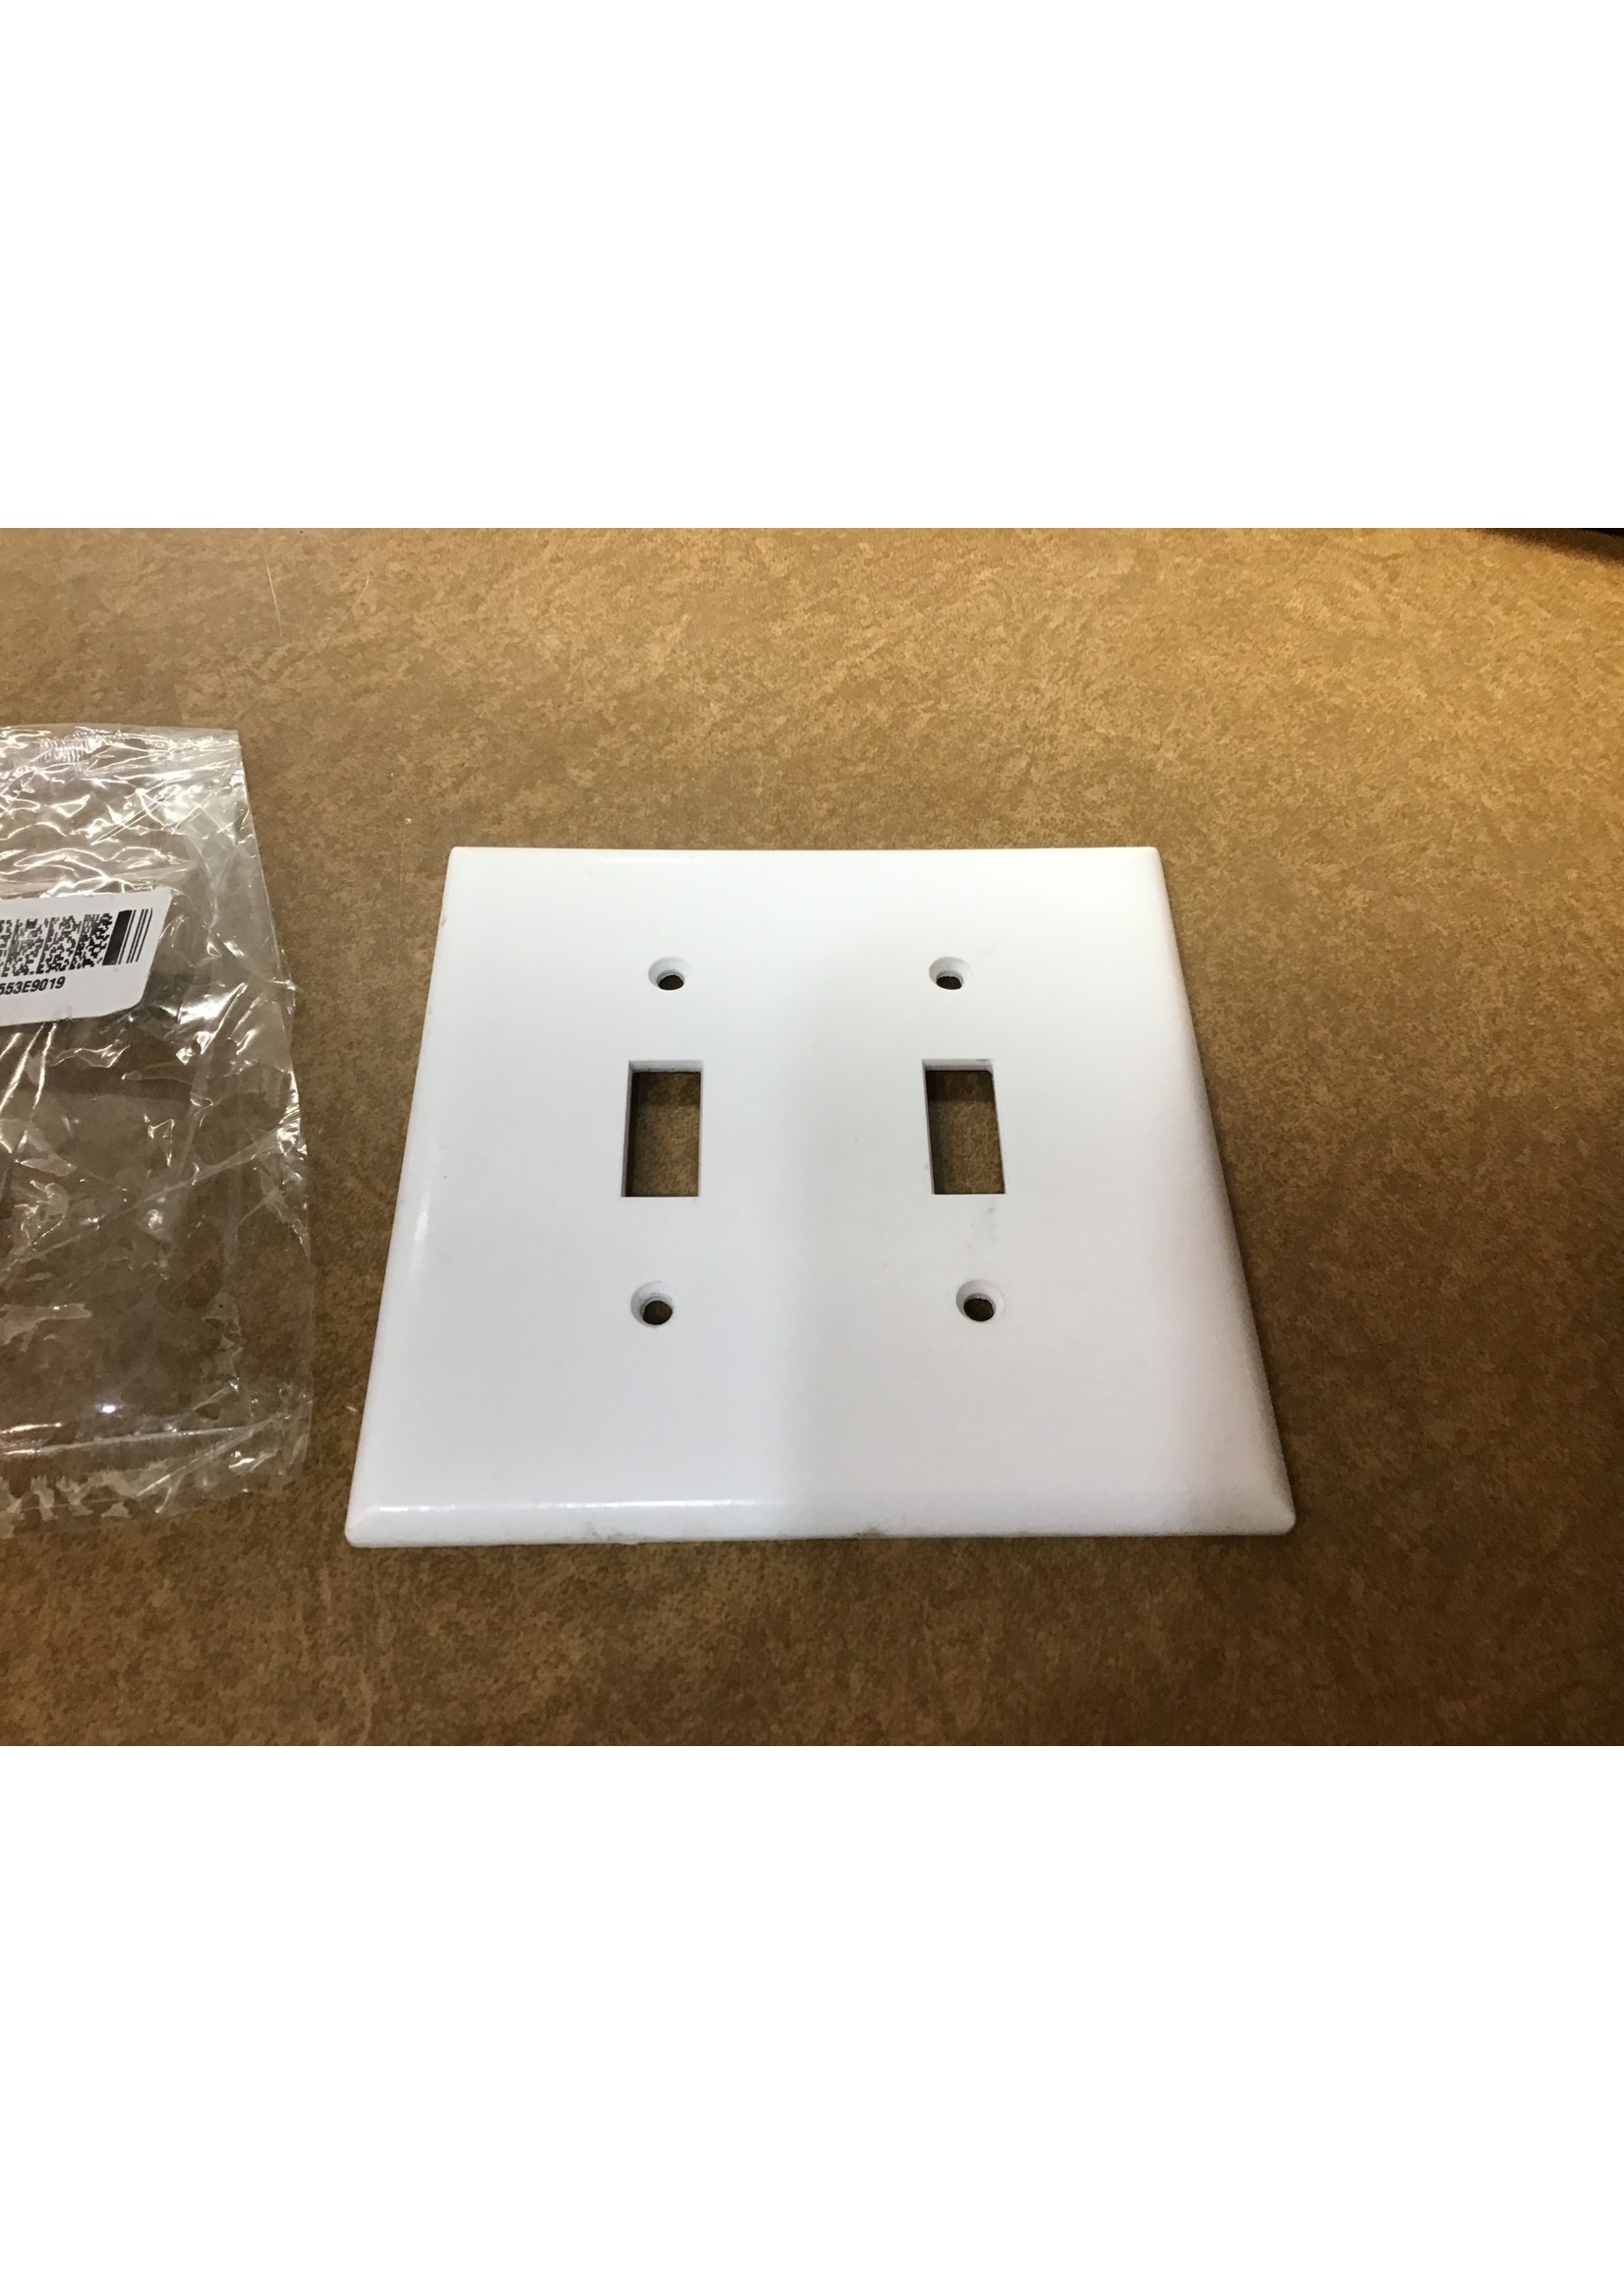 *open package/no screws* Eaton  2-Gang Jumbo Toggle Wall Plate, White